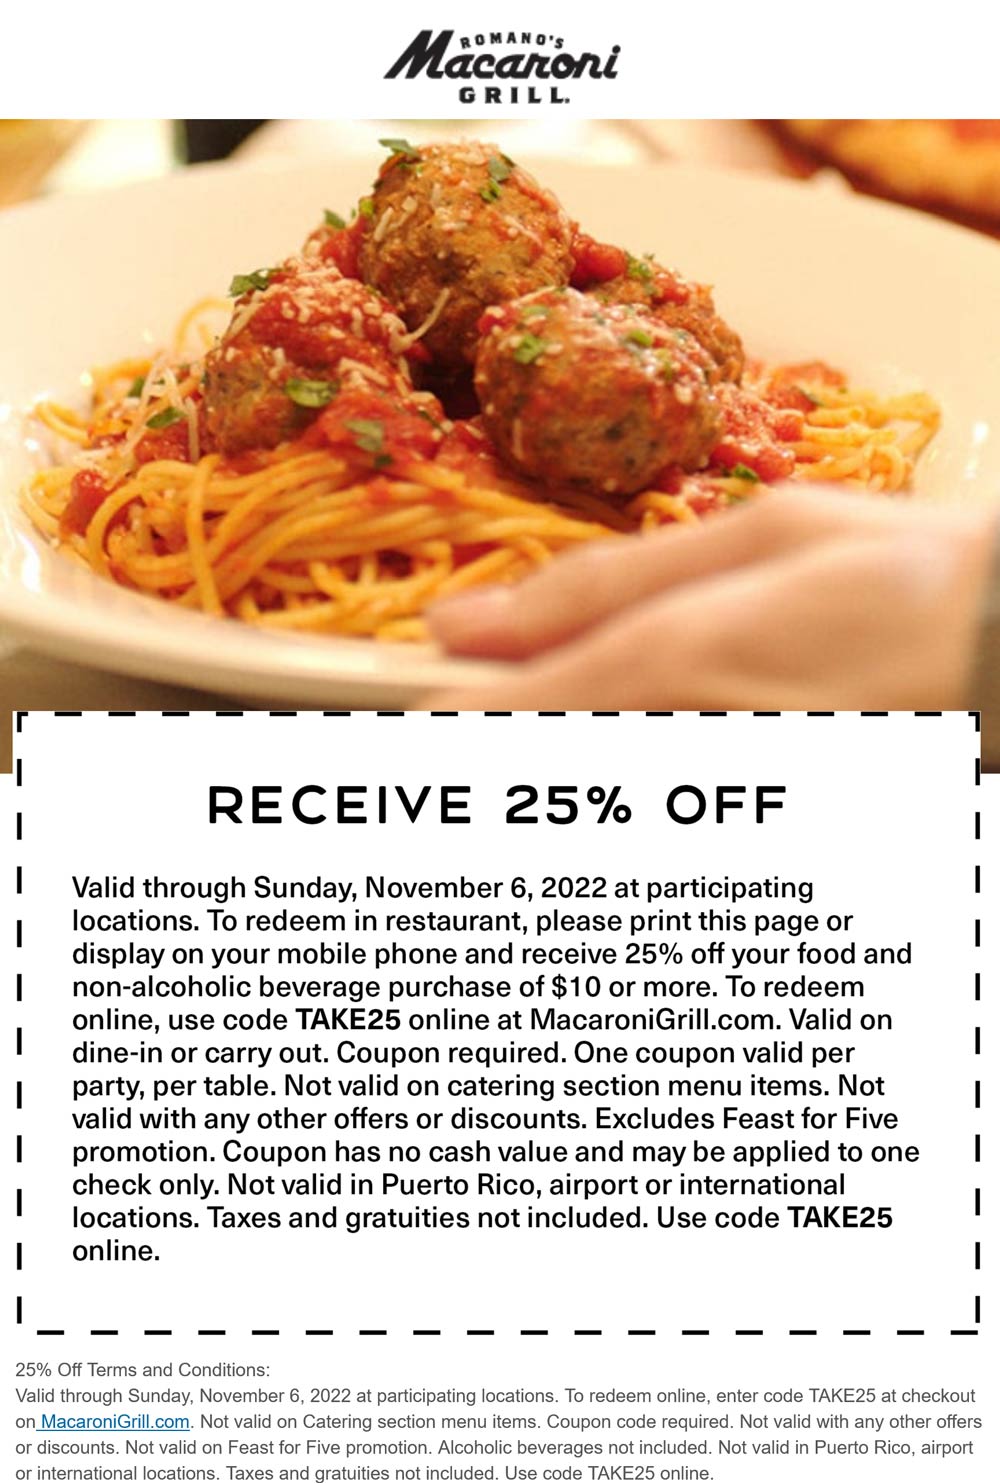 Macaroni Grill restaurants Coupon  25% off at Macaroni Grill restaurants, or online via promo code TAKE25 #macaronigrill 